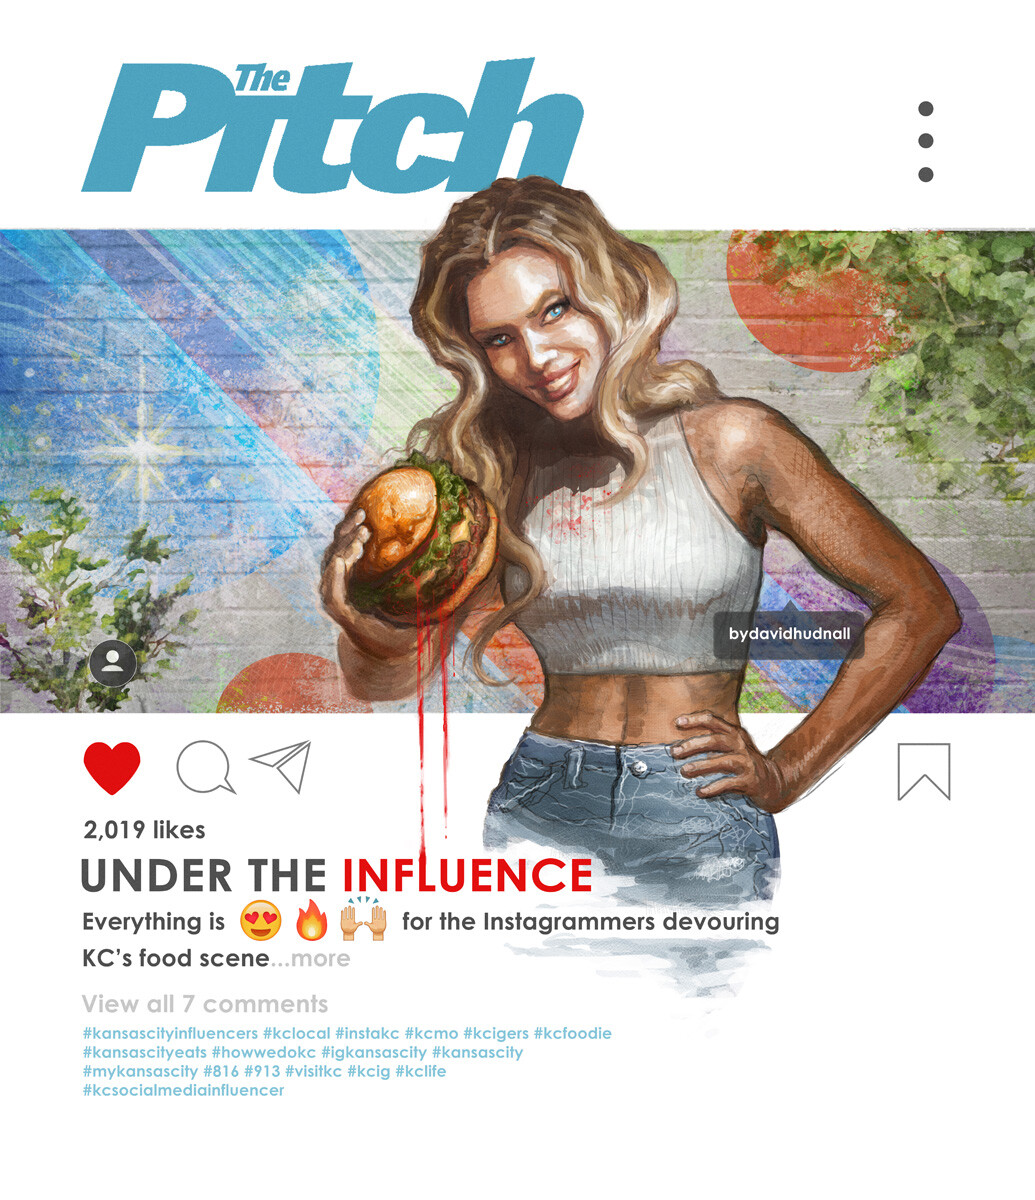 The Pitch cover illustration